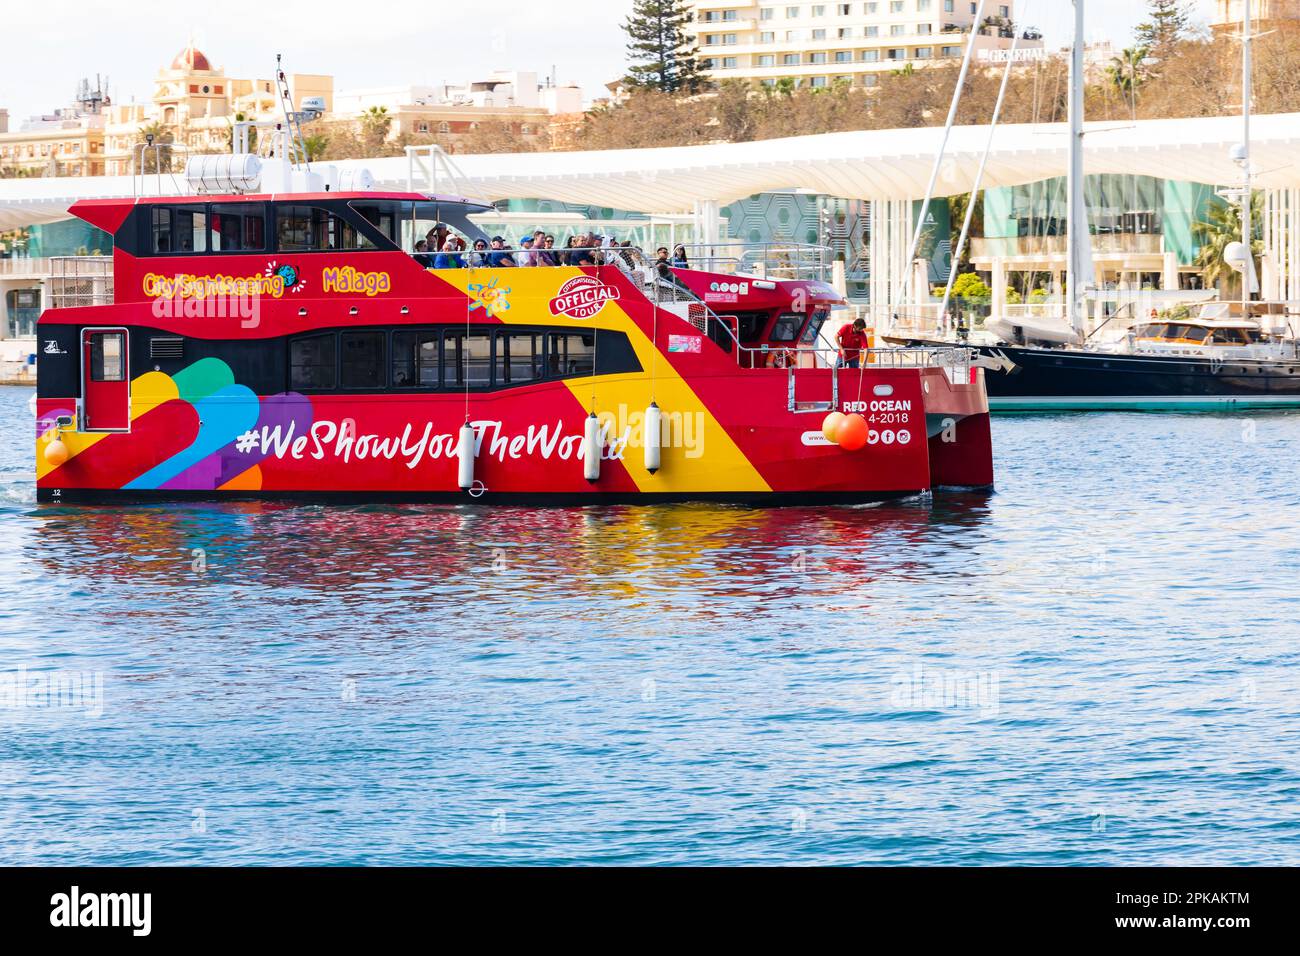 Citysightseeing pleasure boat, Red Ocean,  in the harbour at Malaga, Andalusia, Costa del Sol, Spain. city sightseeing. afloat. Stock Photo